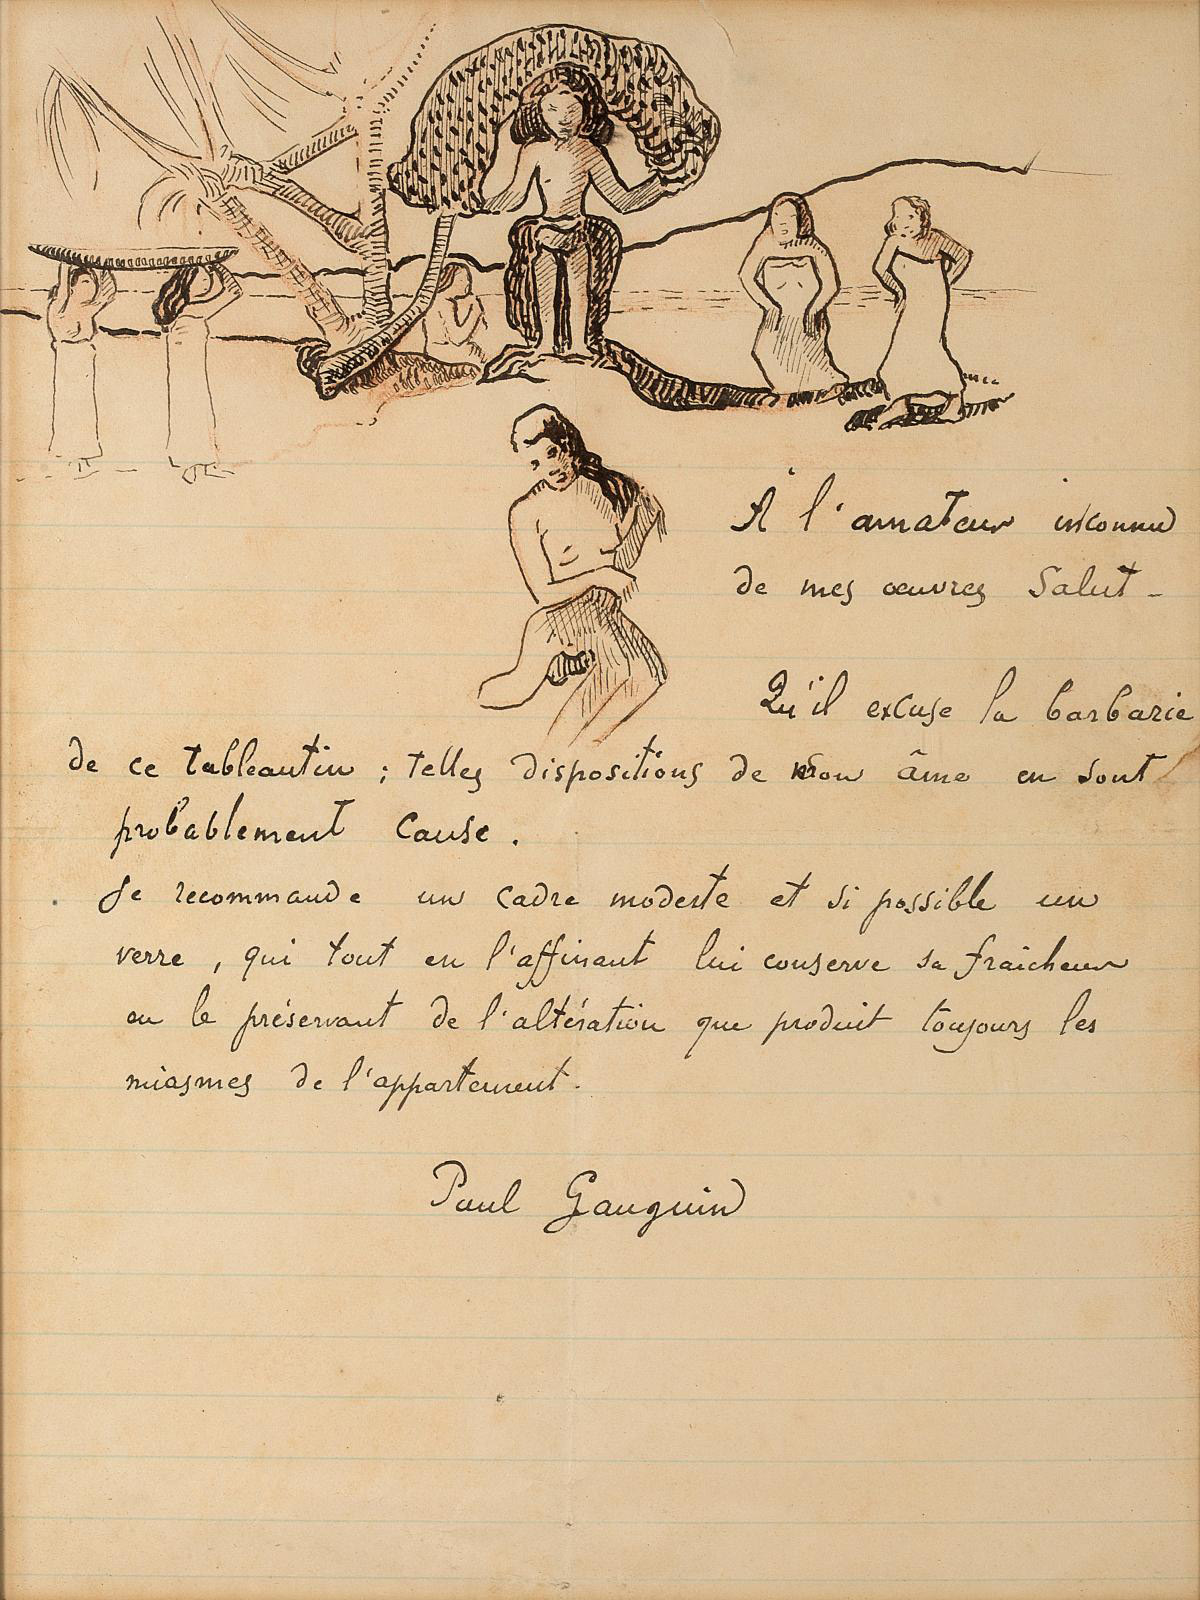 Paul Gauguin (1848–1903), signed autograph letter with ink drawing "à l’amateur inconnu de mes œuvres" ("to the unknown lover of my works"